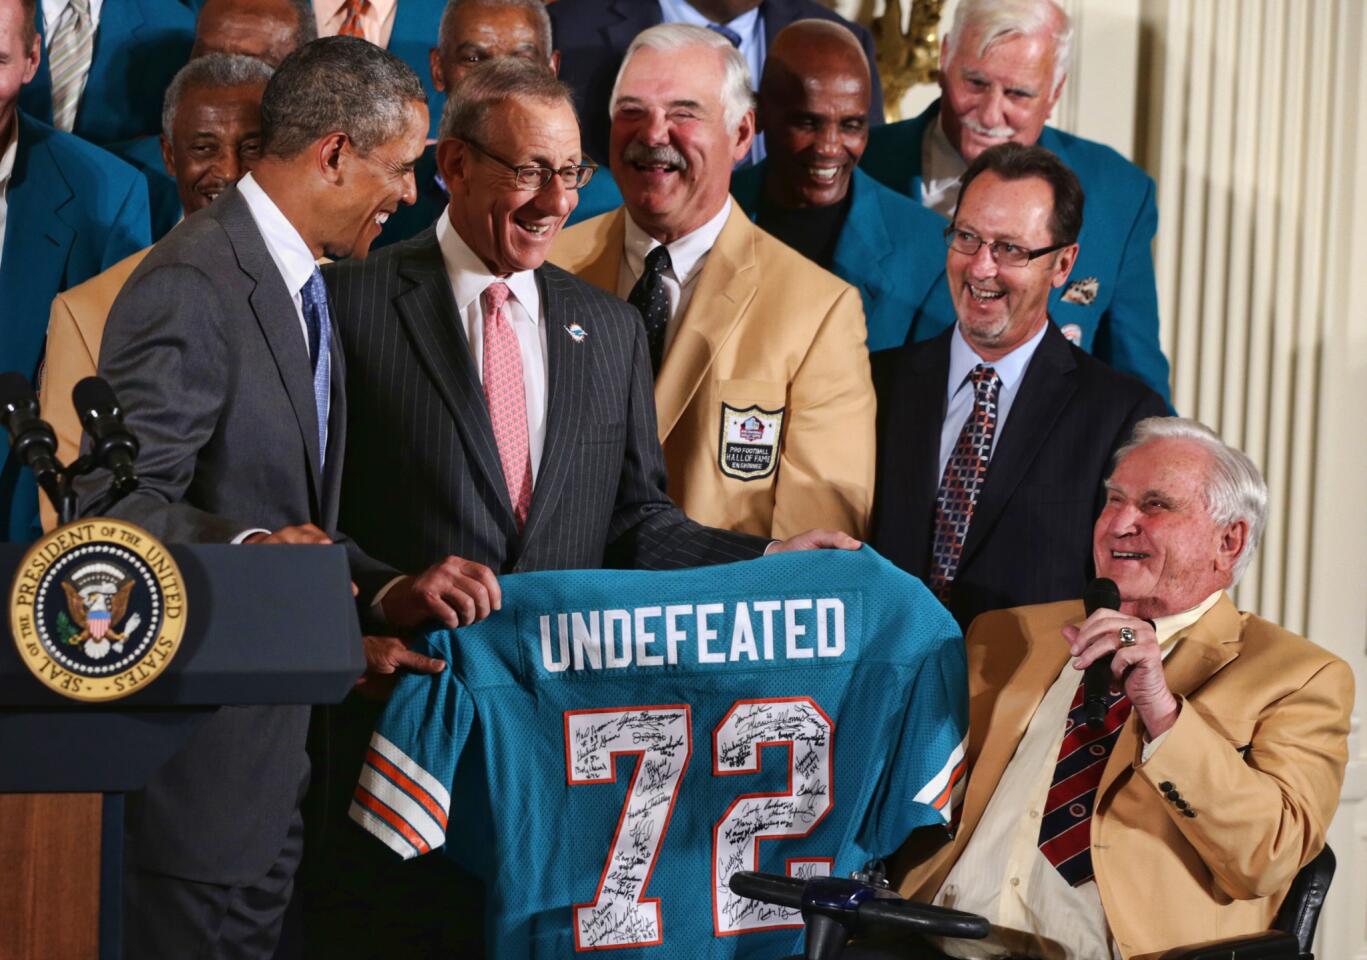 U.S. President Barack Obama (L) is presented with a jersey by current team owner Stephen Ross (2nd L) as members of the 1972 Miami Dolphins, head coach Don Shula (R), running back Larry Csonka (3rd L) and other members look on during an East Room event August 20, 2013 at the White House in Washington, DC. President Obama hosted the undefeated 1972 Super Bowl champions who didn't get the chance to be honored at the White House back then.